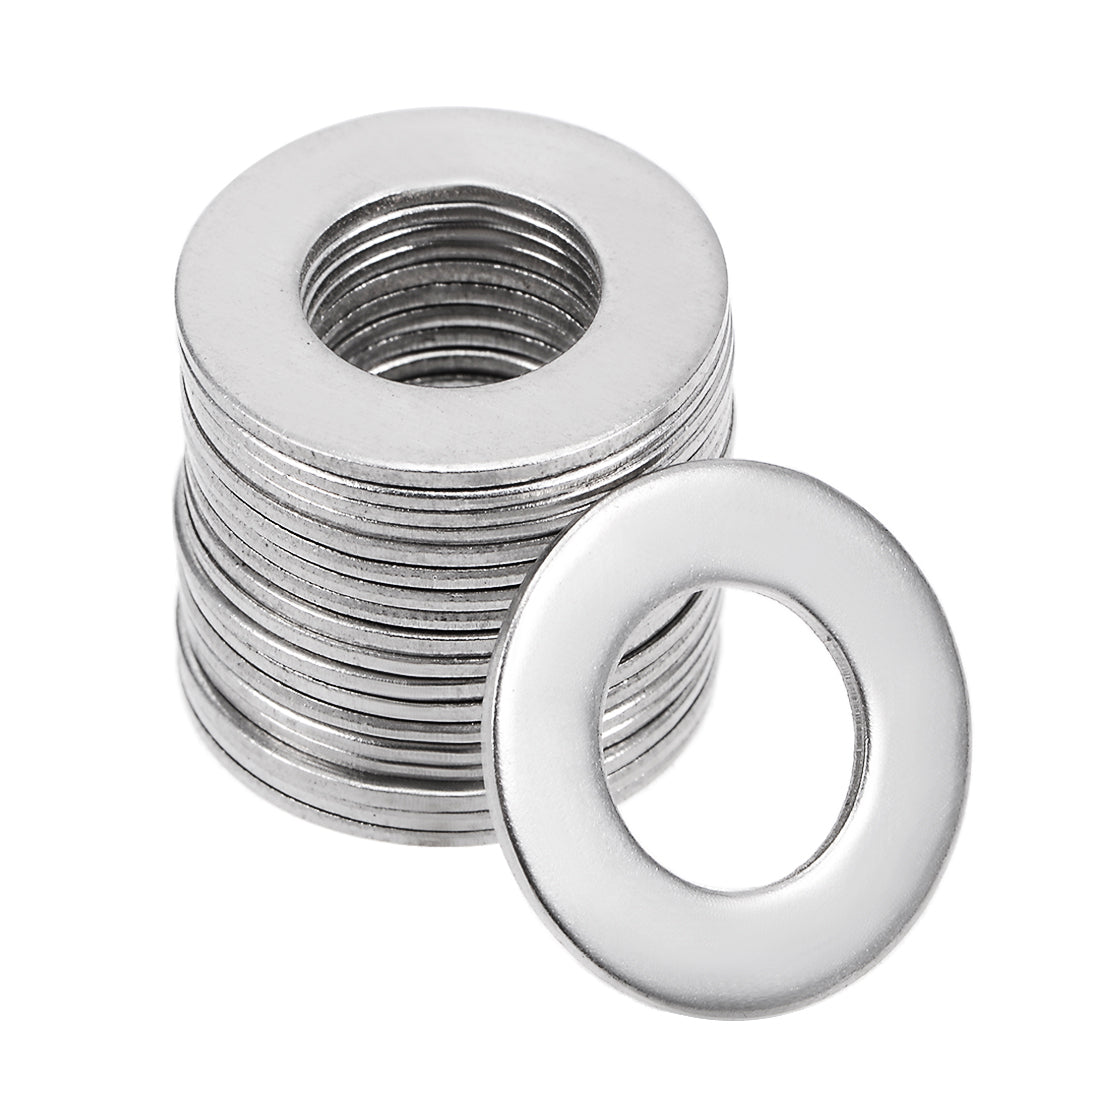 uxcell Uxcell 20 Pcs 16mm x 8.5mm x 0.8mm 304 Stainless Steel Flat Washer for Screw Bolt